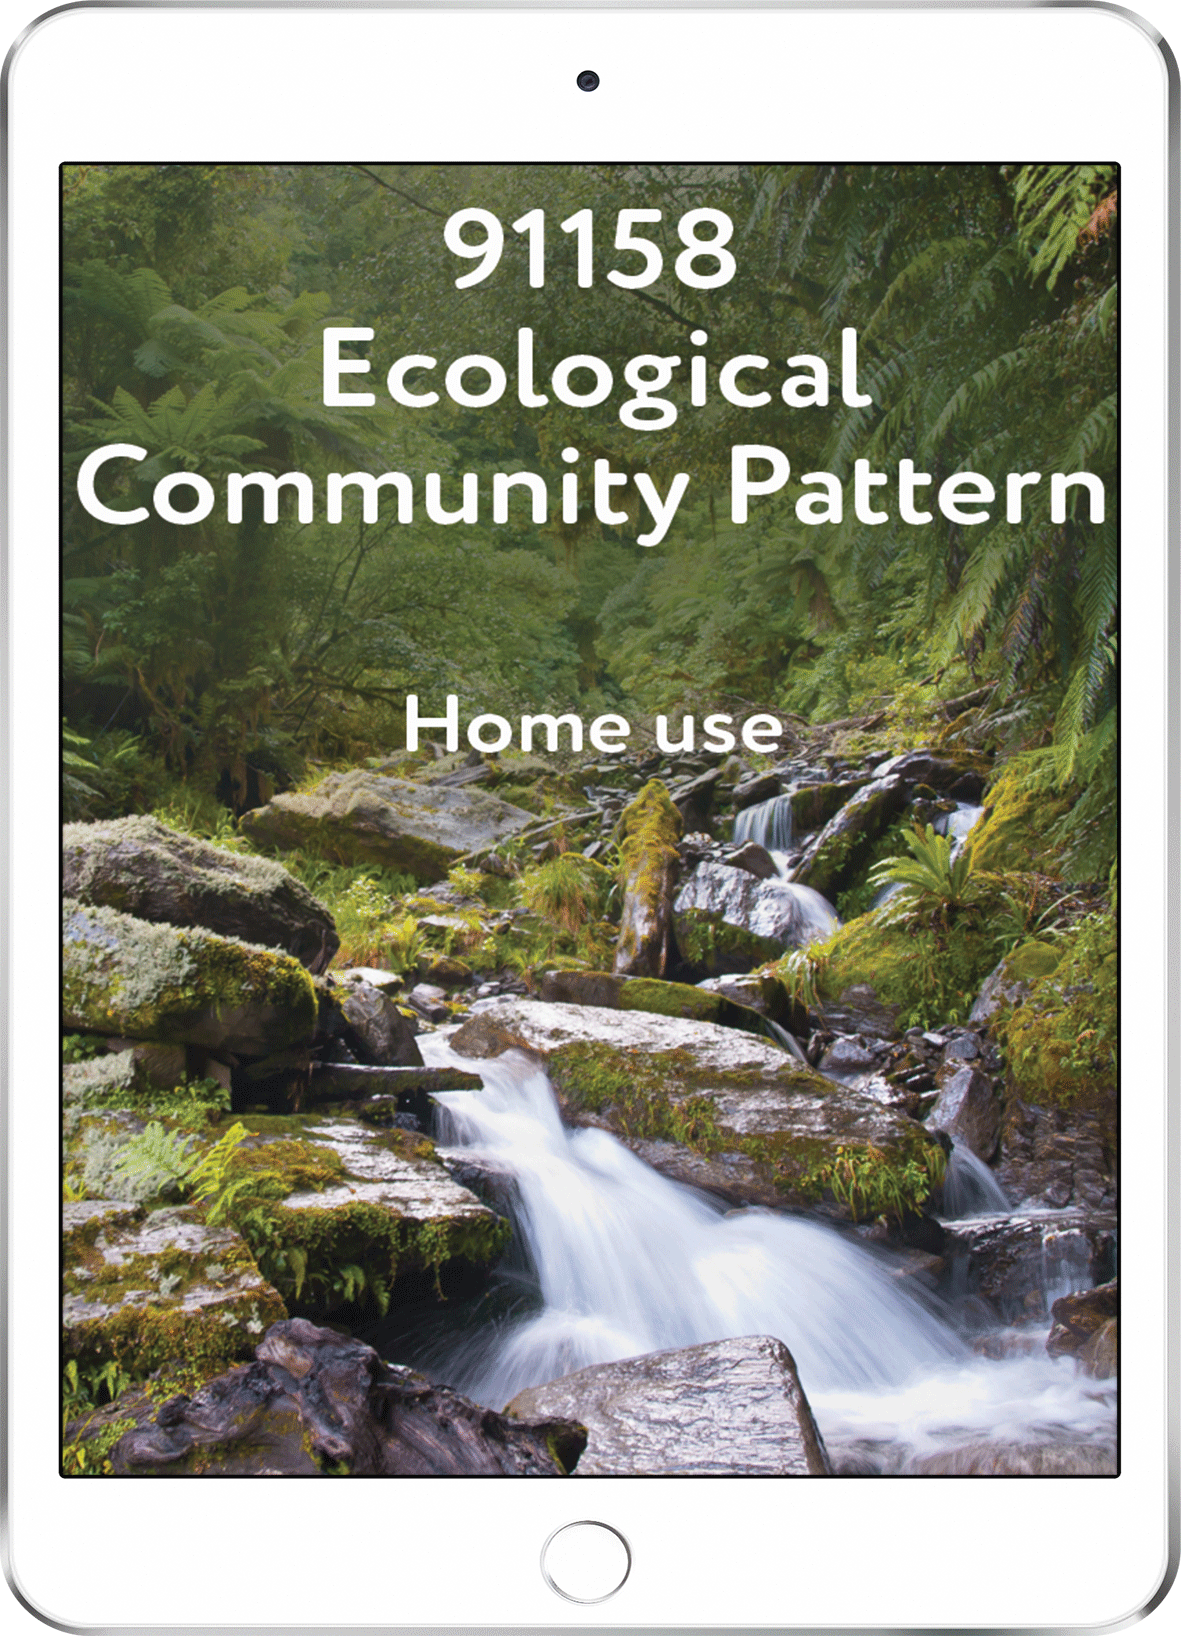 91158 Ecological Community Pattern - Home Use